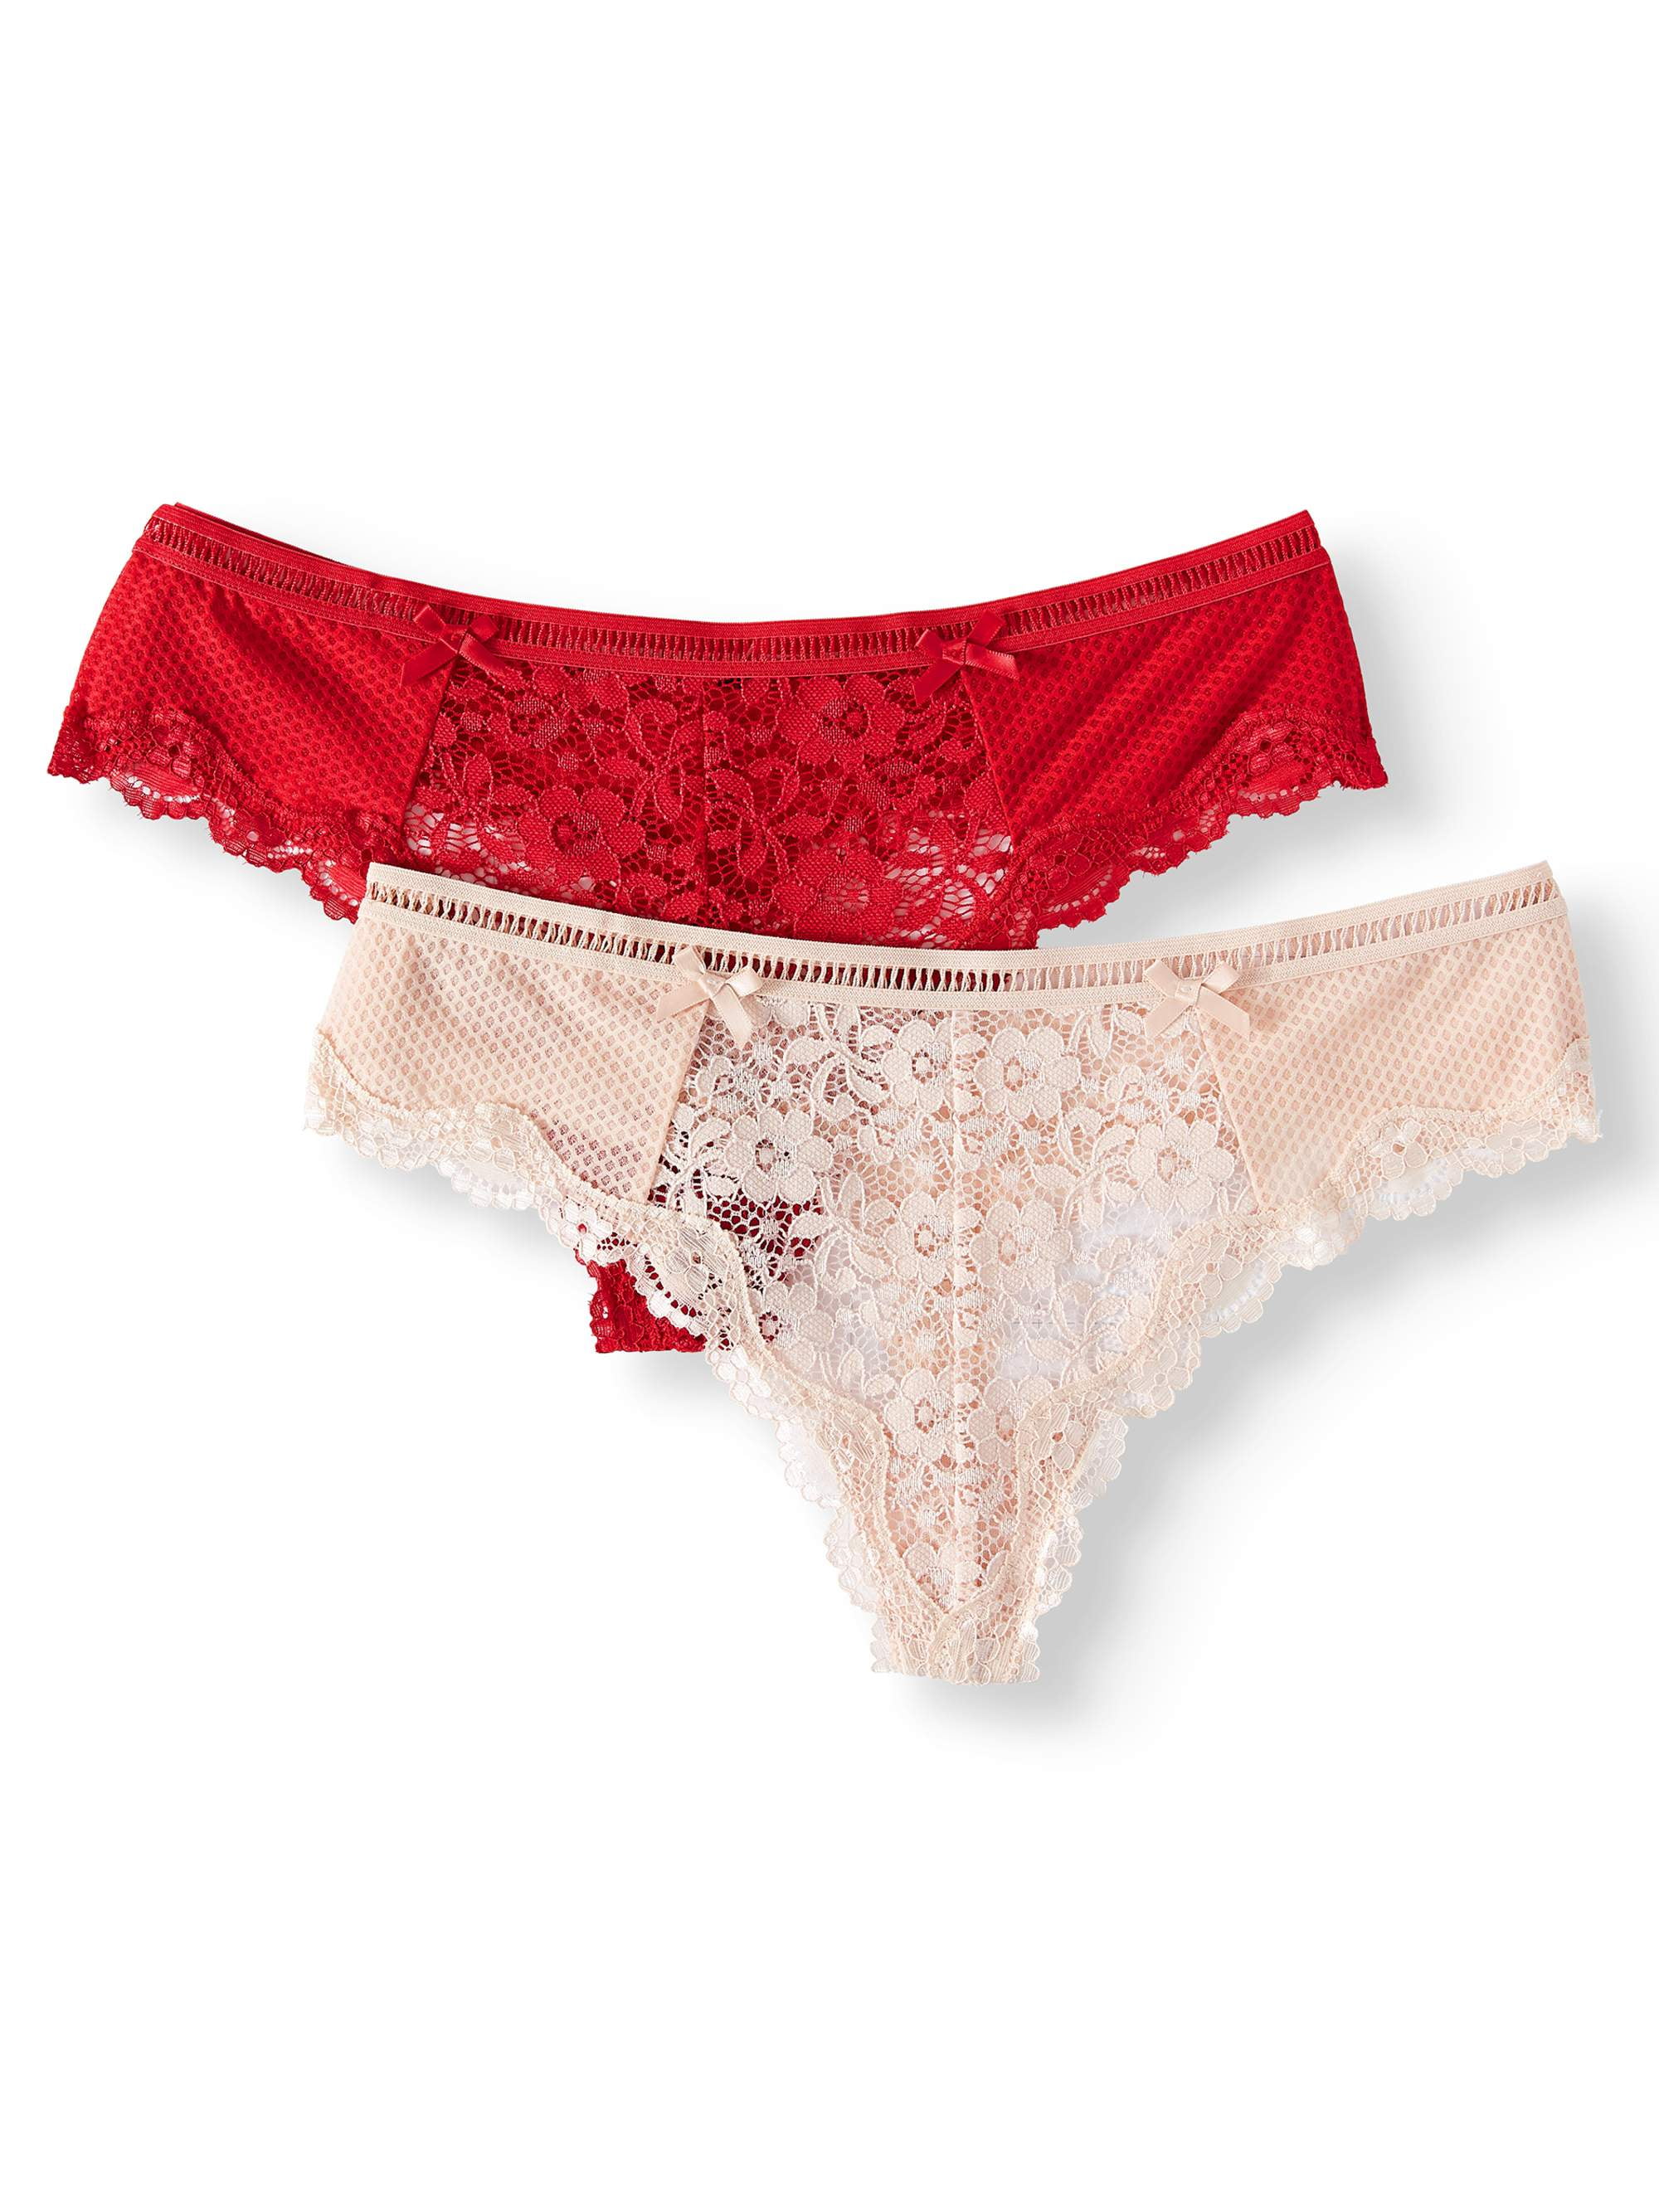 Smart And Sexy Smart And Sexy Women S Lace Thong Panties 2 Pack